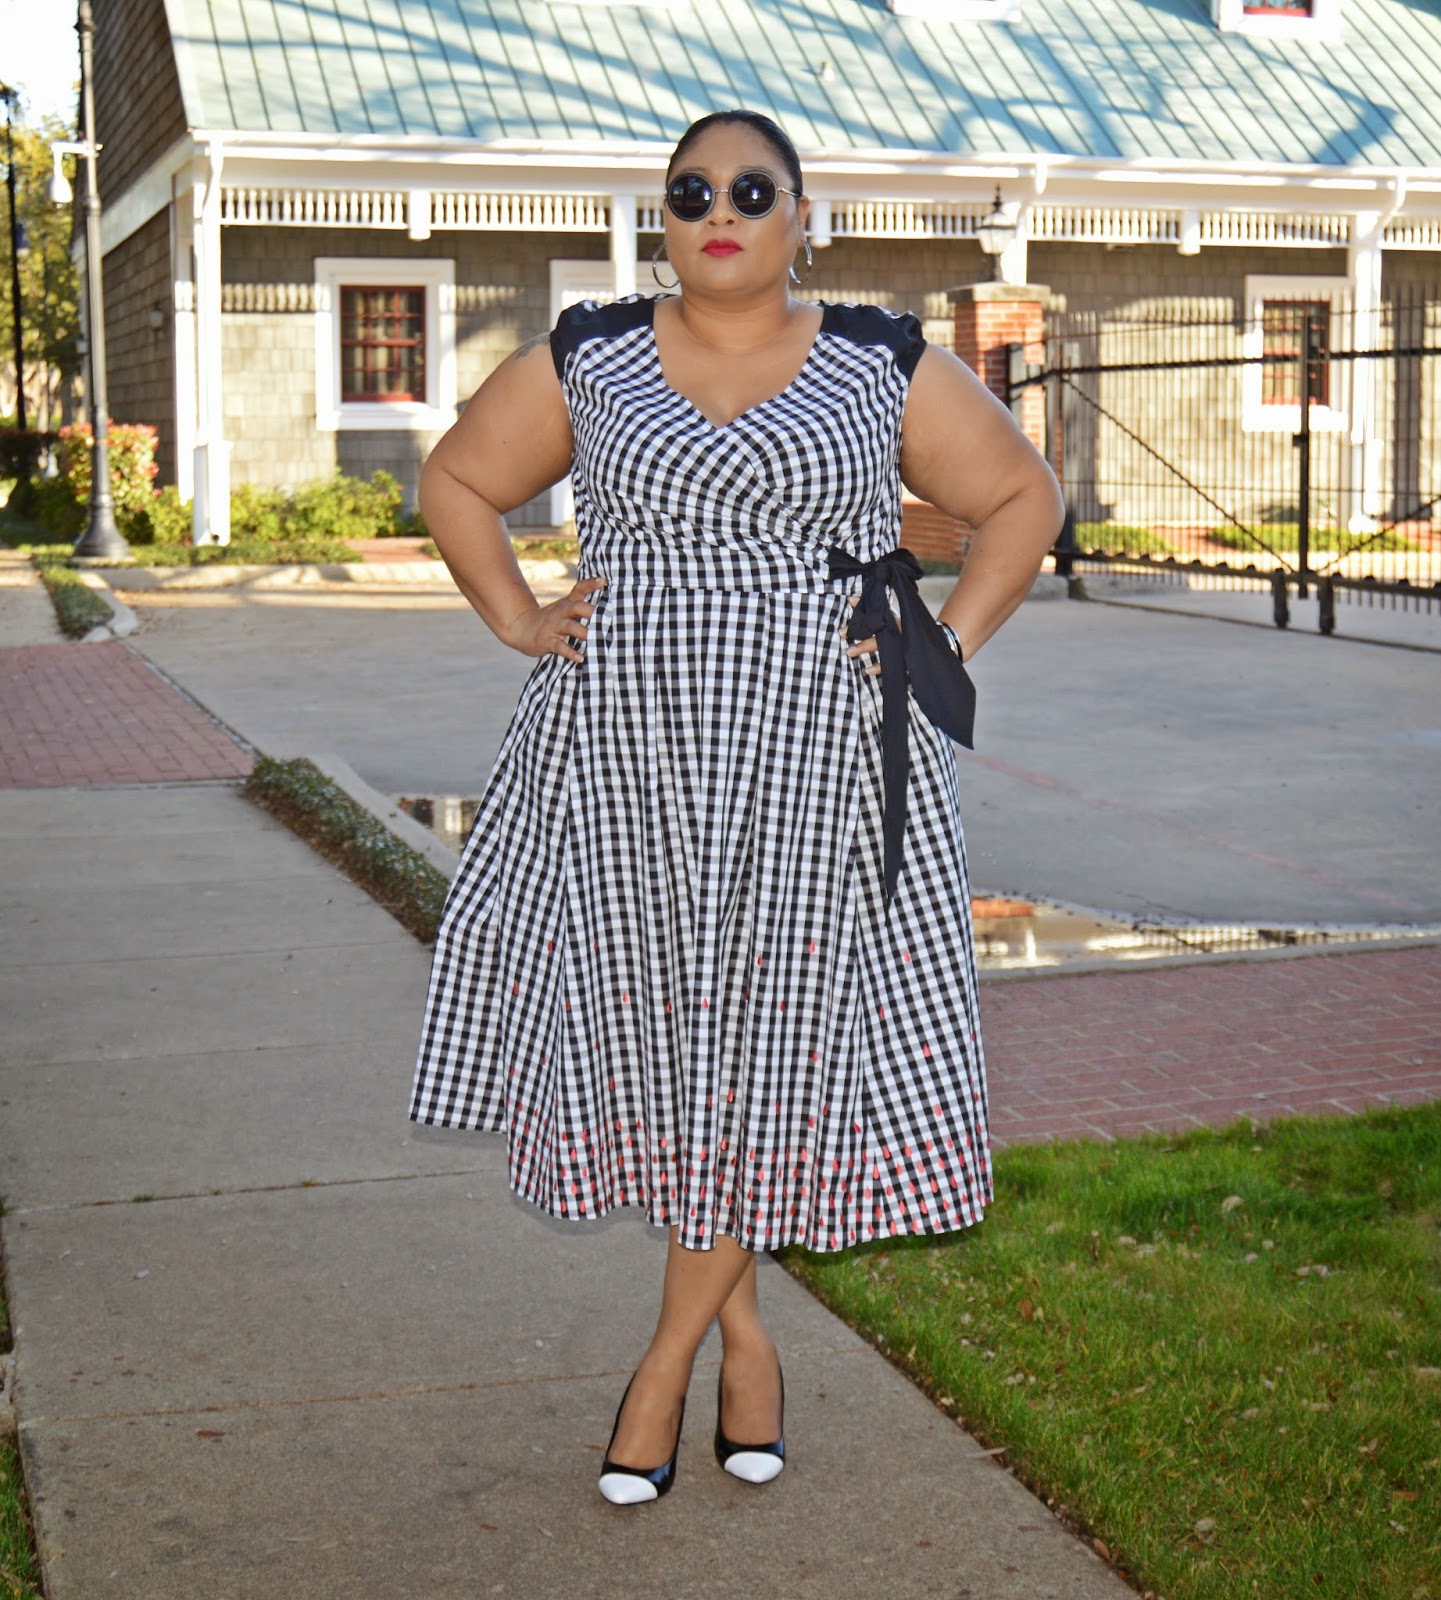 FROM THE REZ TO THE CITY: GINGHAM STYLE